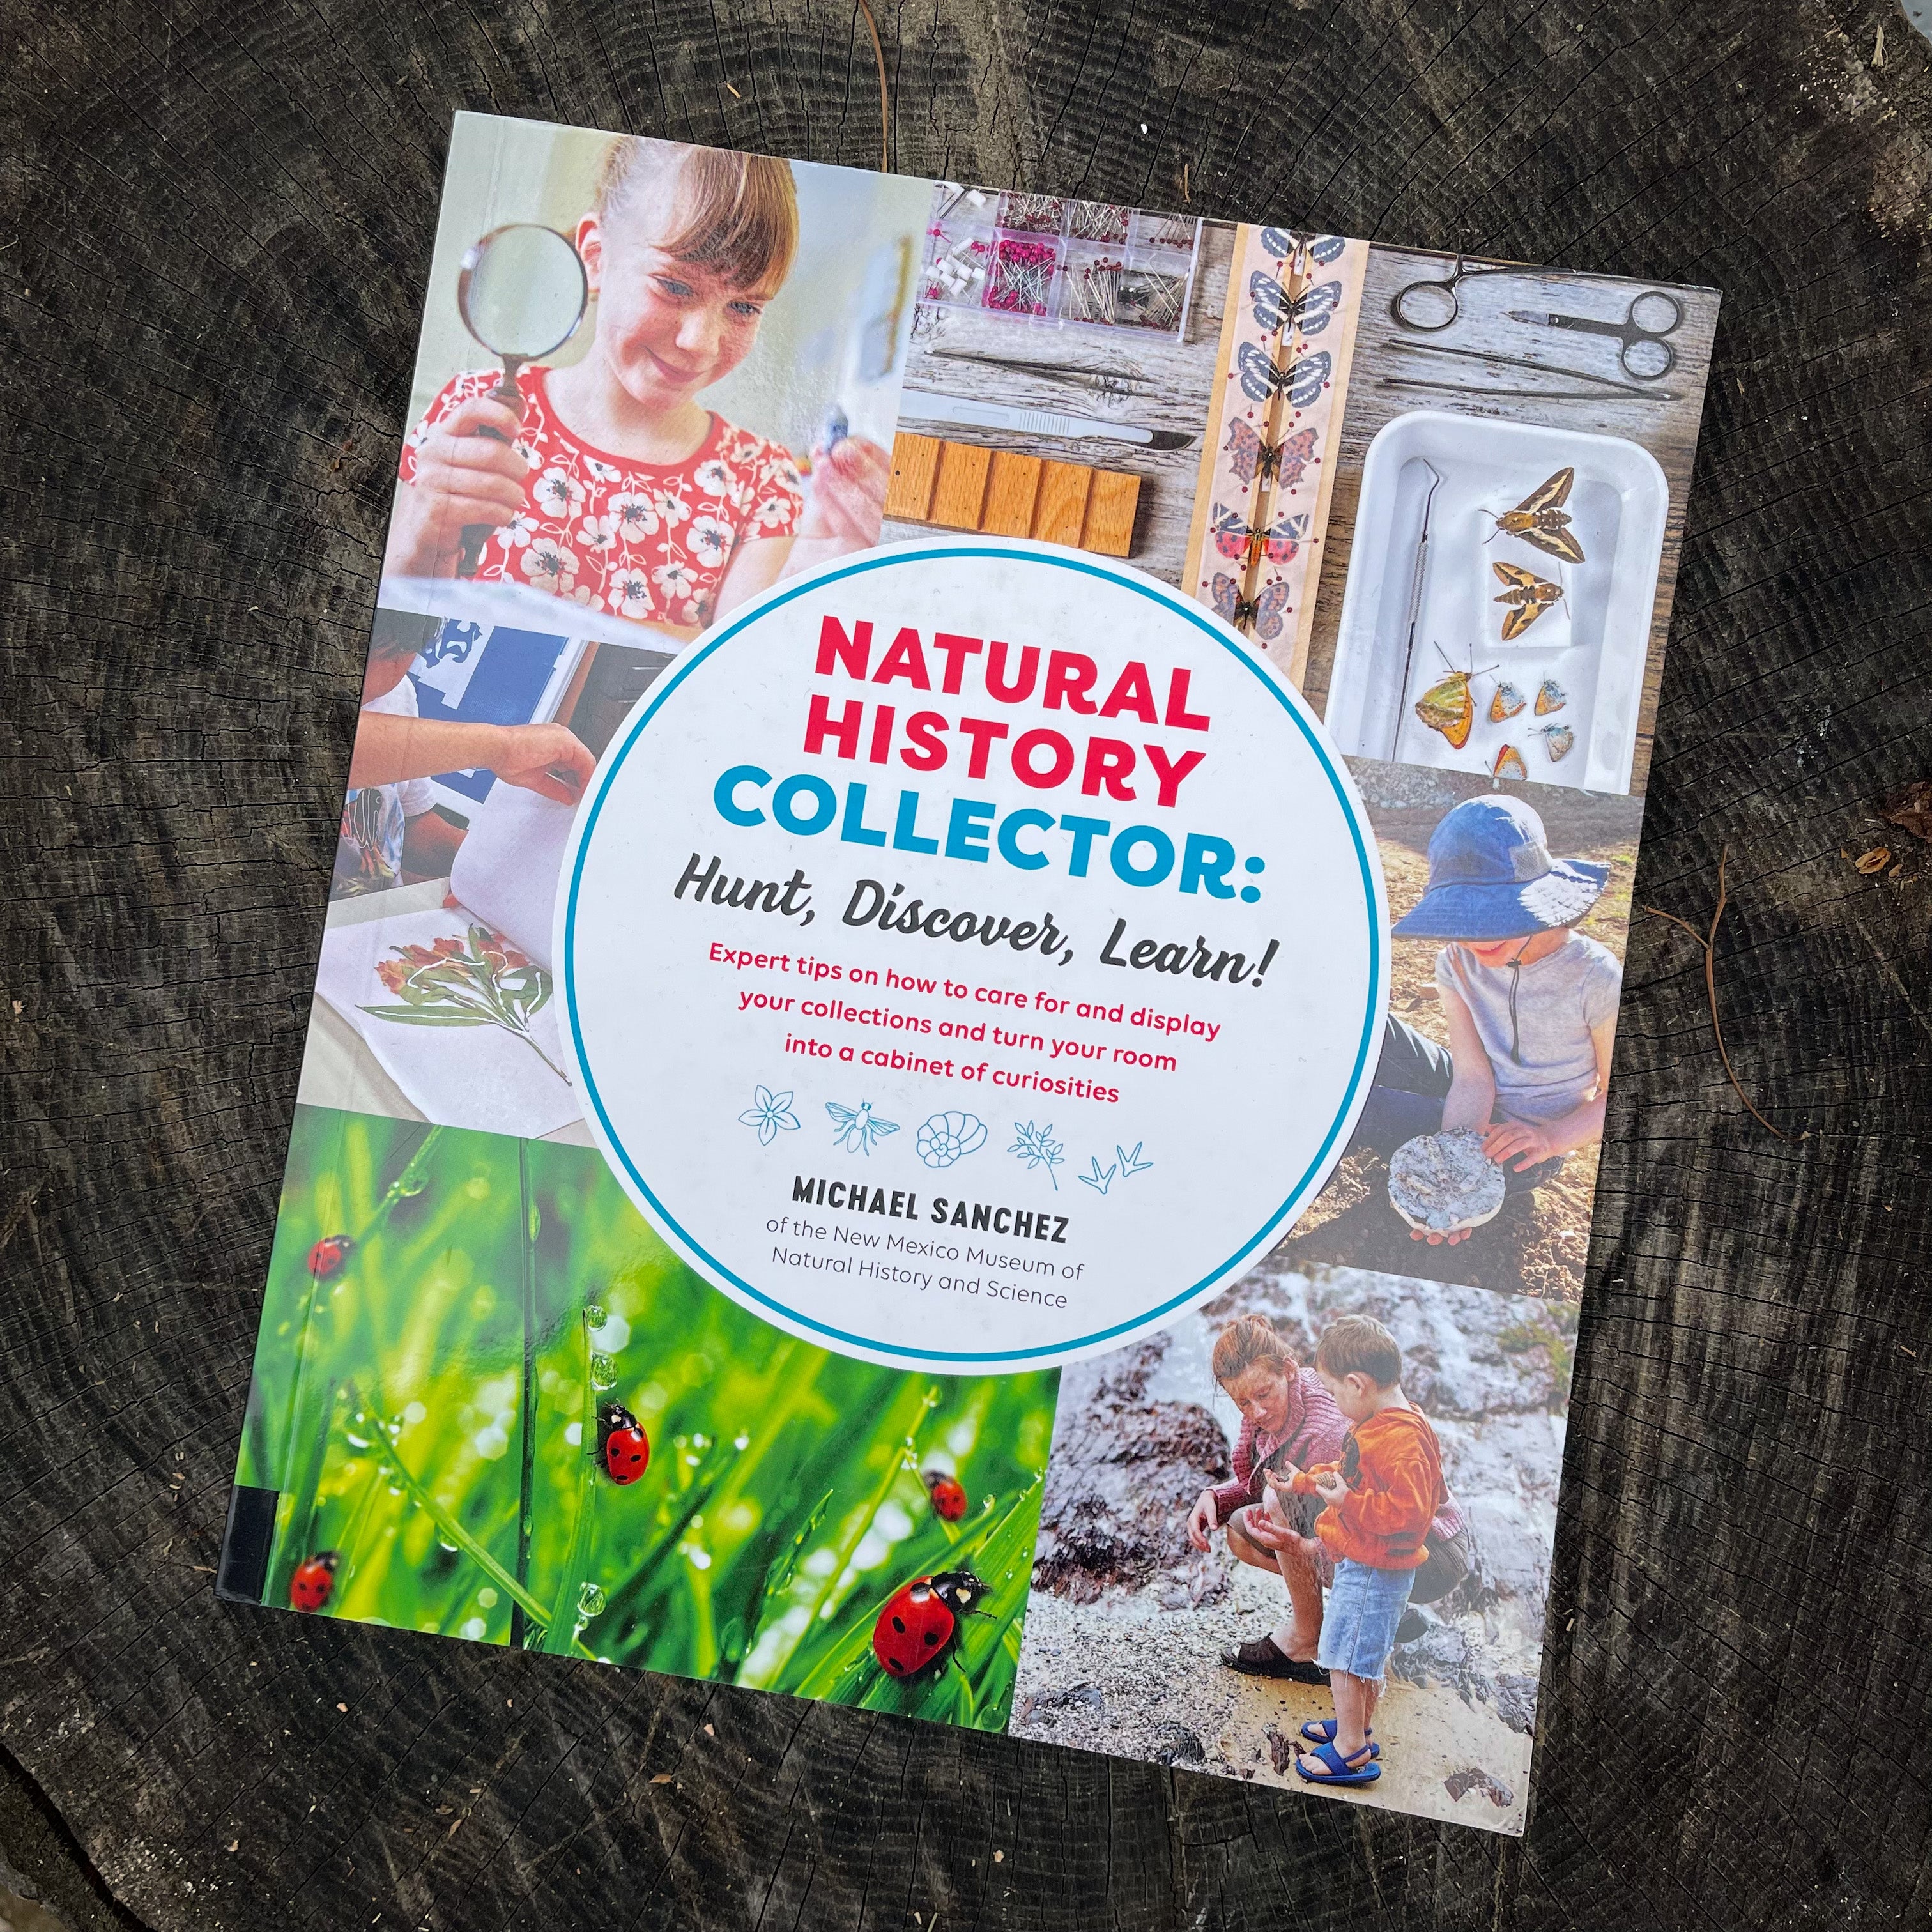 "Natural History Collector: Hunt, Discover, Learn!" Book